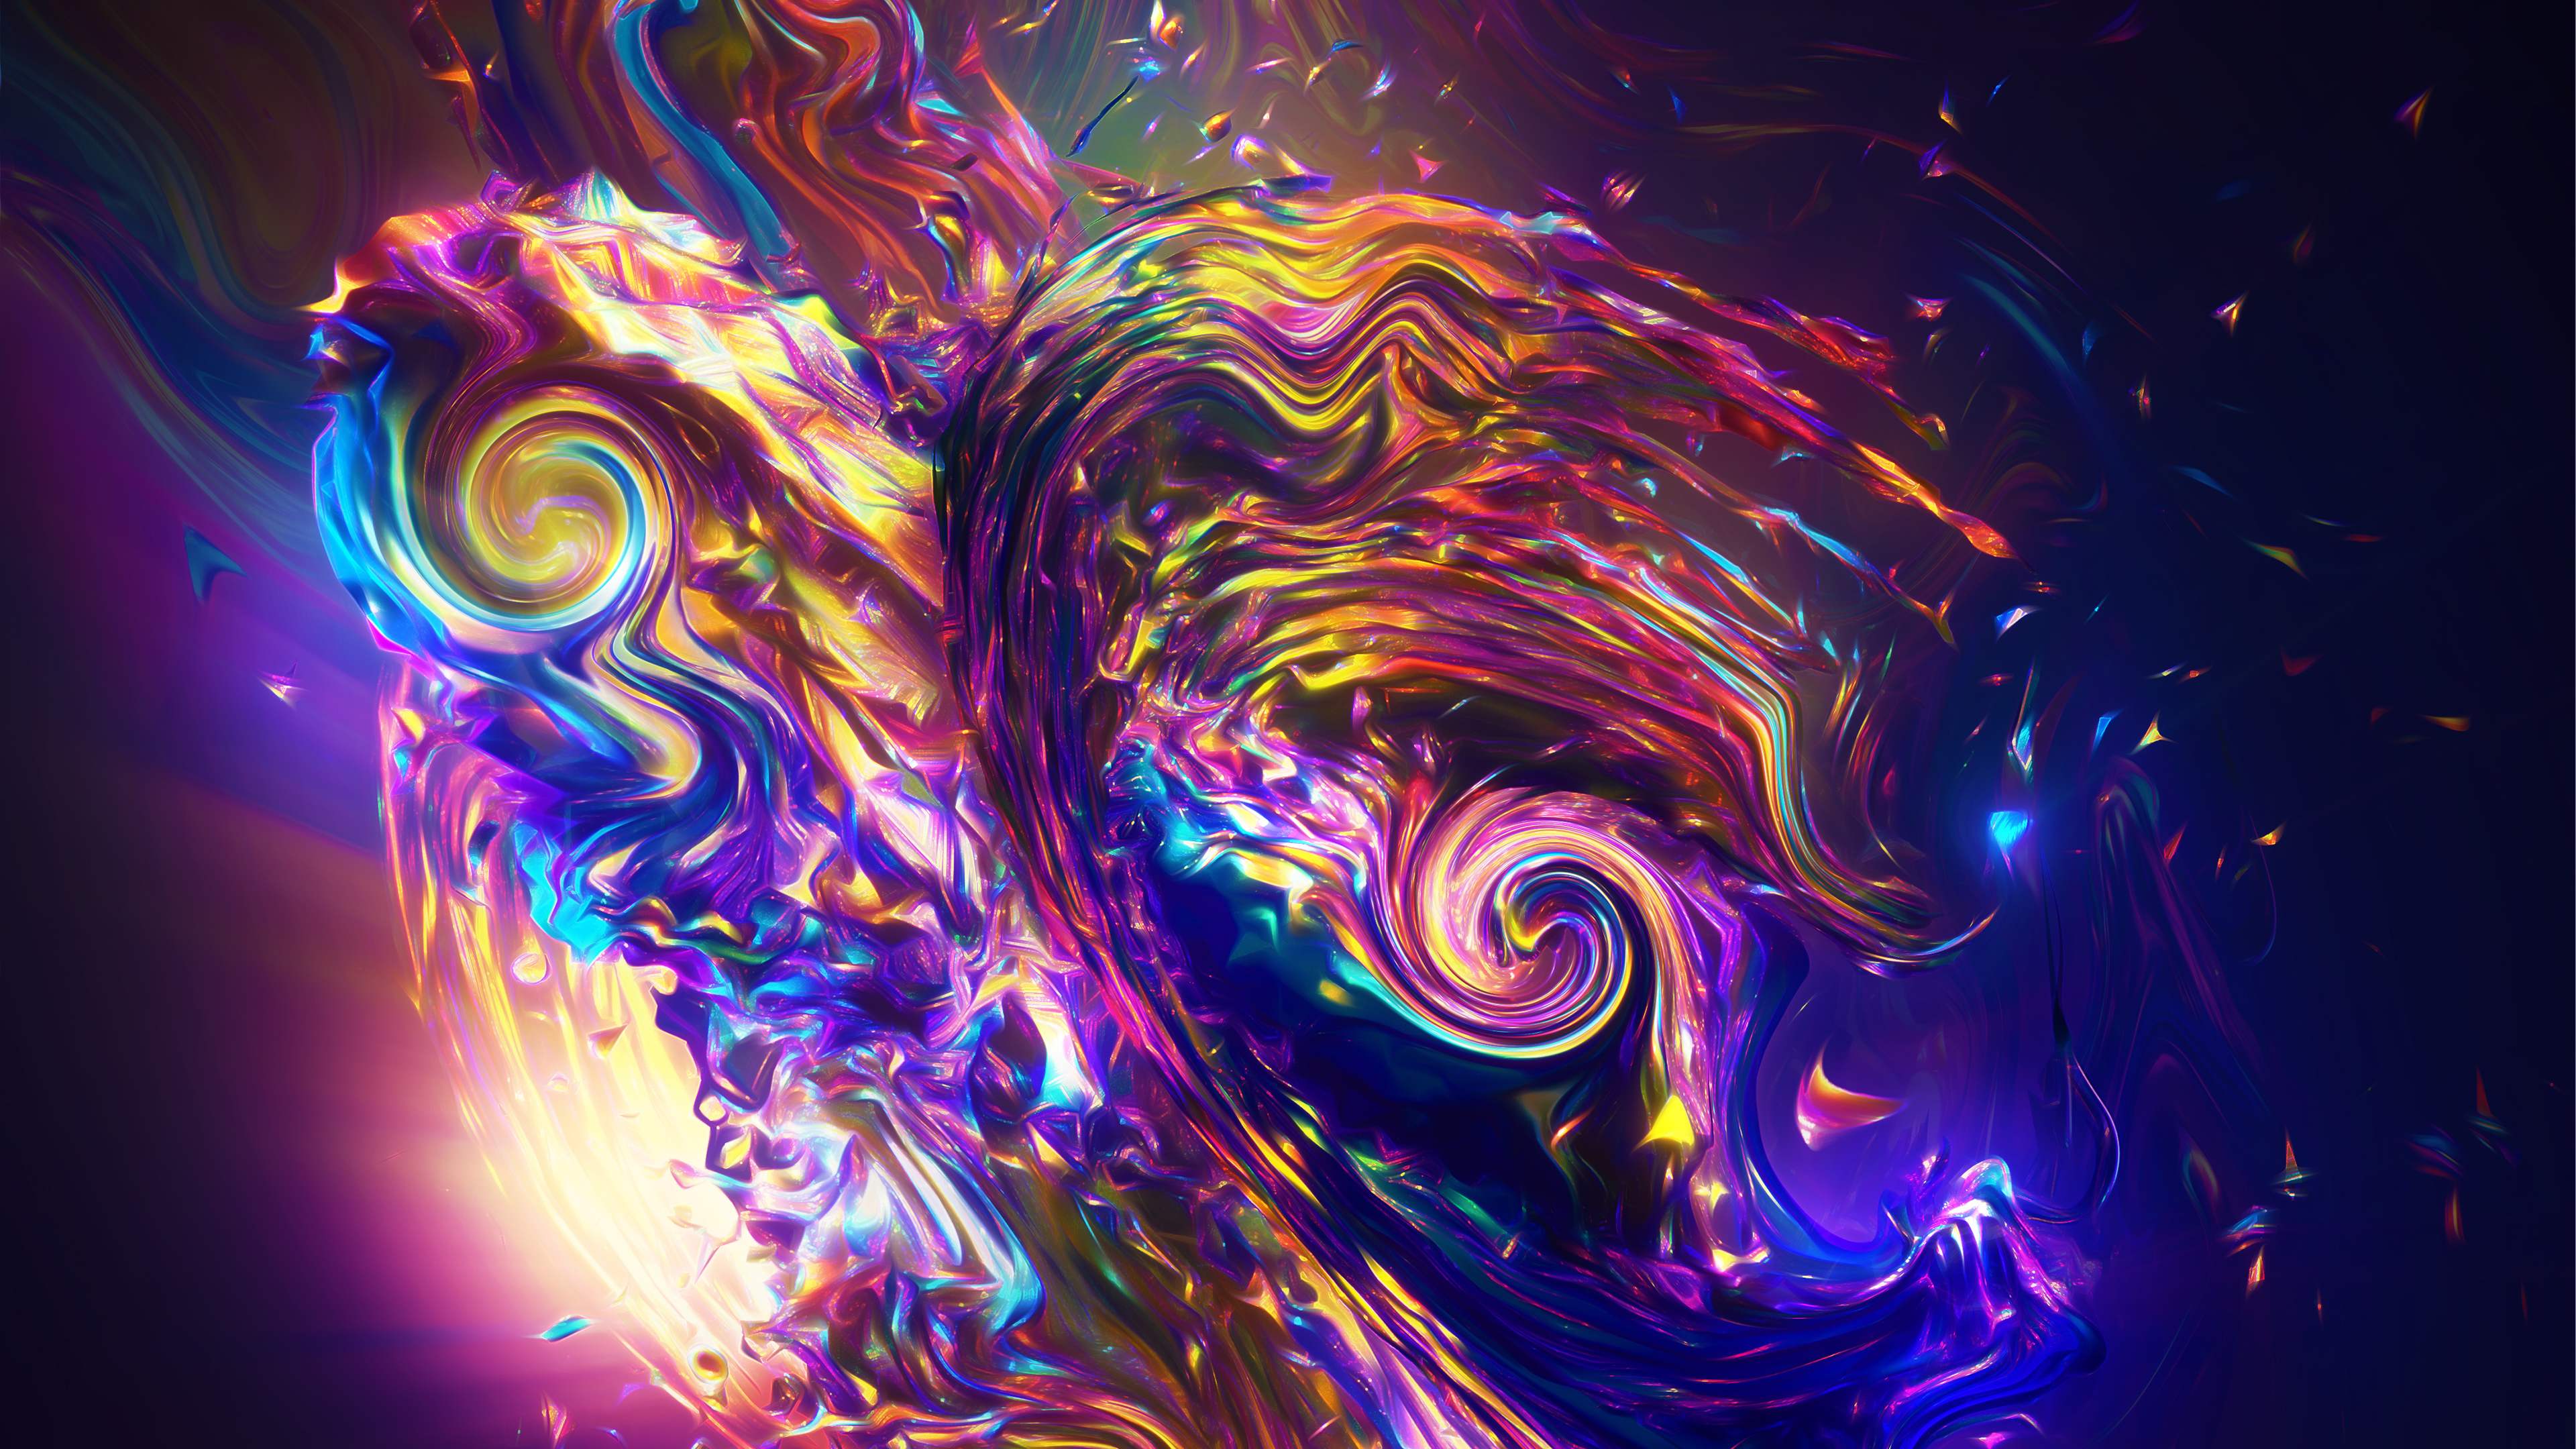 Bright multicolor abstract blurred drawing. Desktop wallpapers 1280x1024